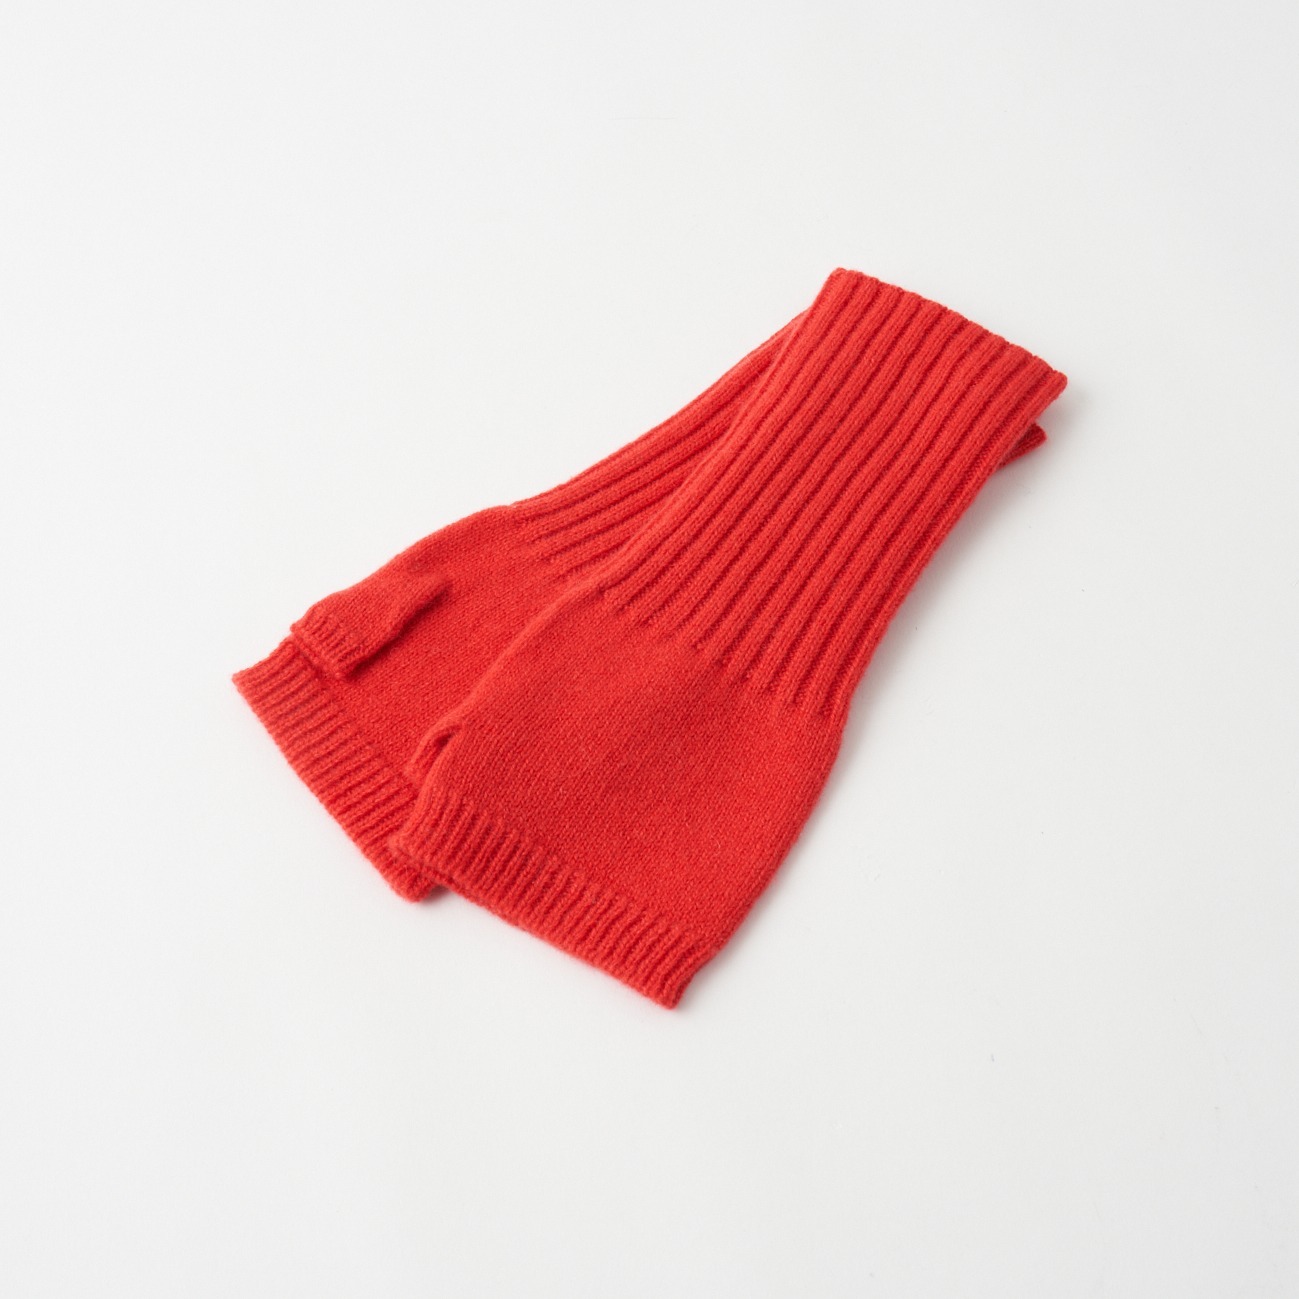 HOLIDAY CASHMERE GLOVE 詳細画像 レッド 1